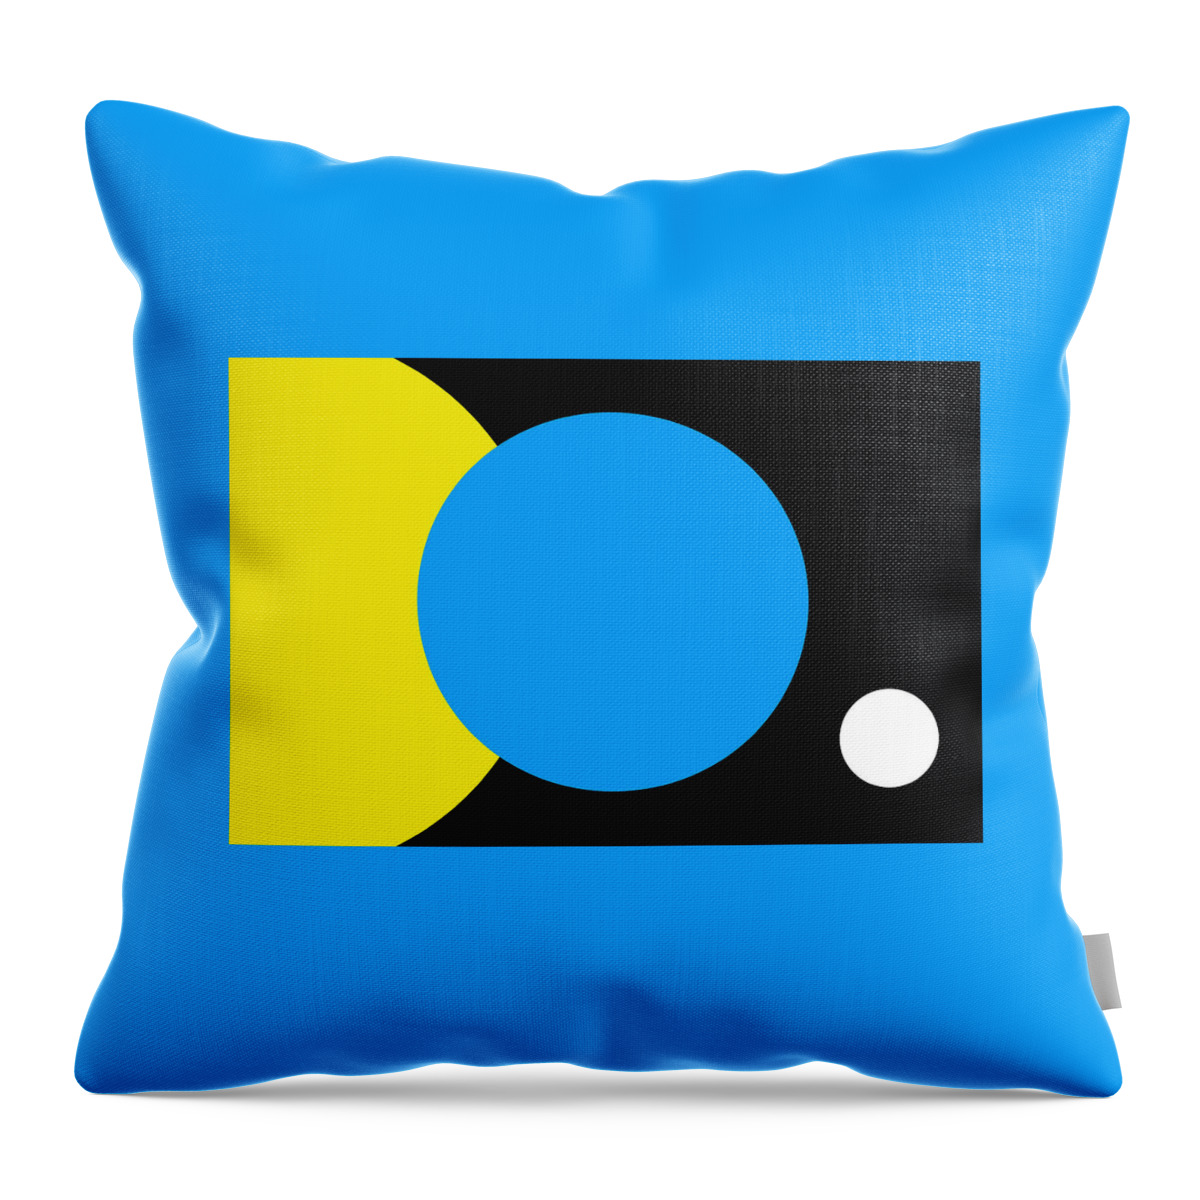 Richard Reeve Throw Pillow featuring the digital art Flag Of Earth by Richard Reeve